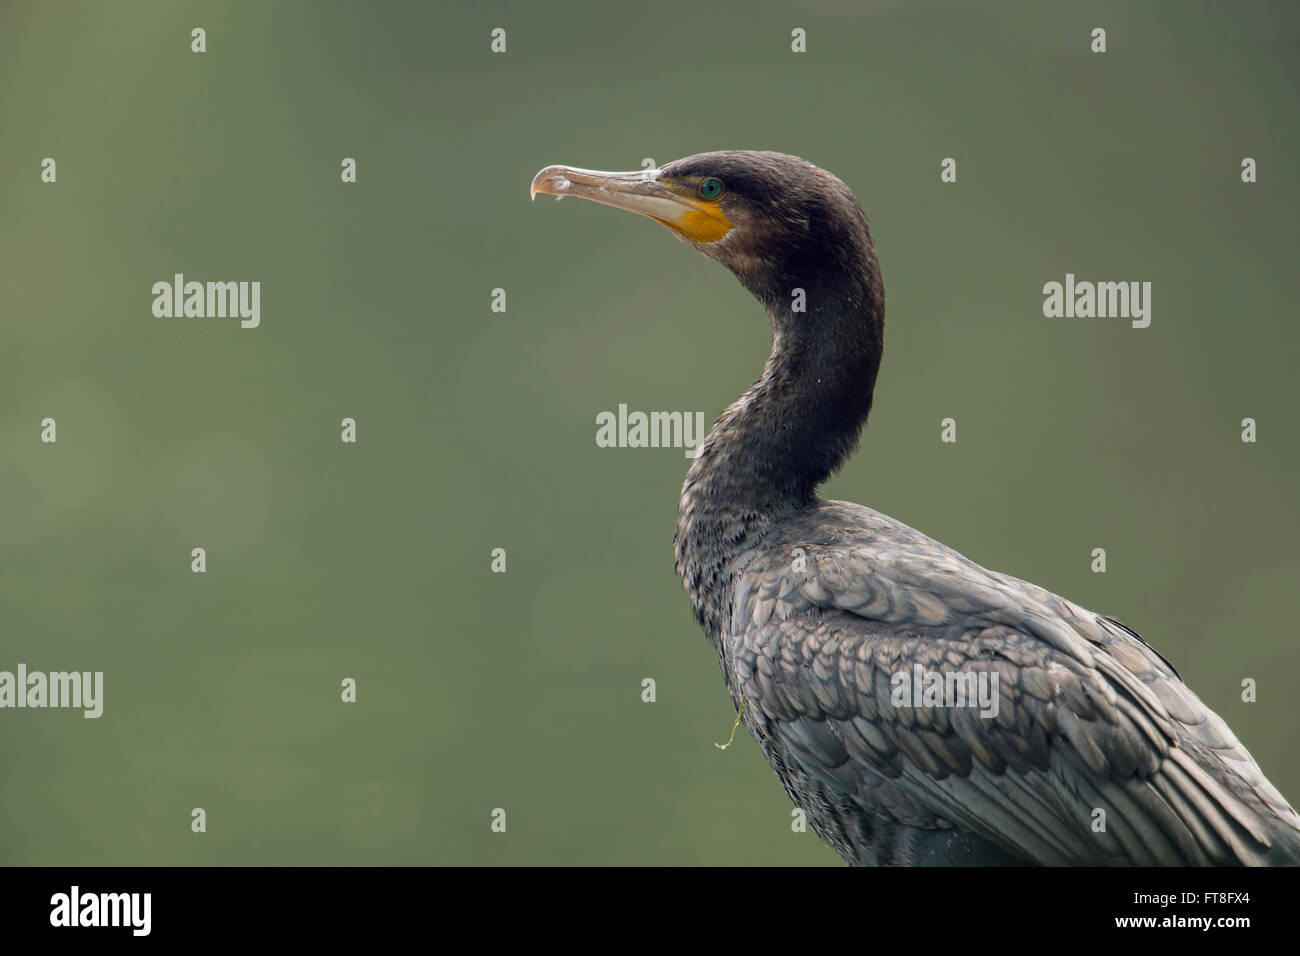 Great Cormorant ( Phalacrocorax carbo ), adult, close up, portrait shot, sitting in front of a clean natural green background. Stock Photo